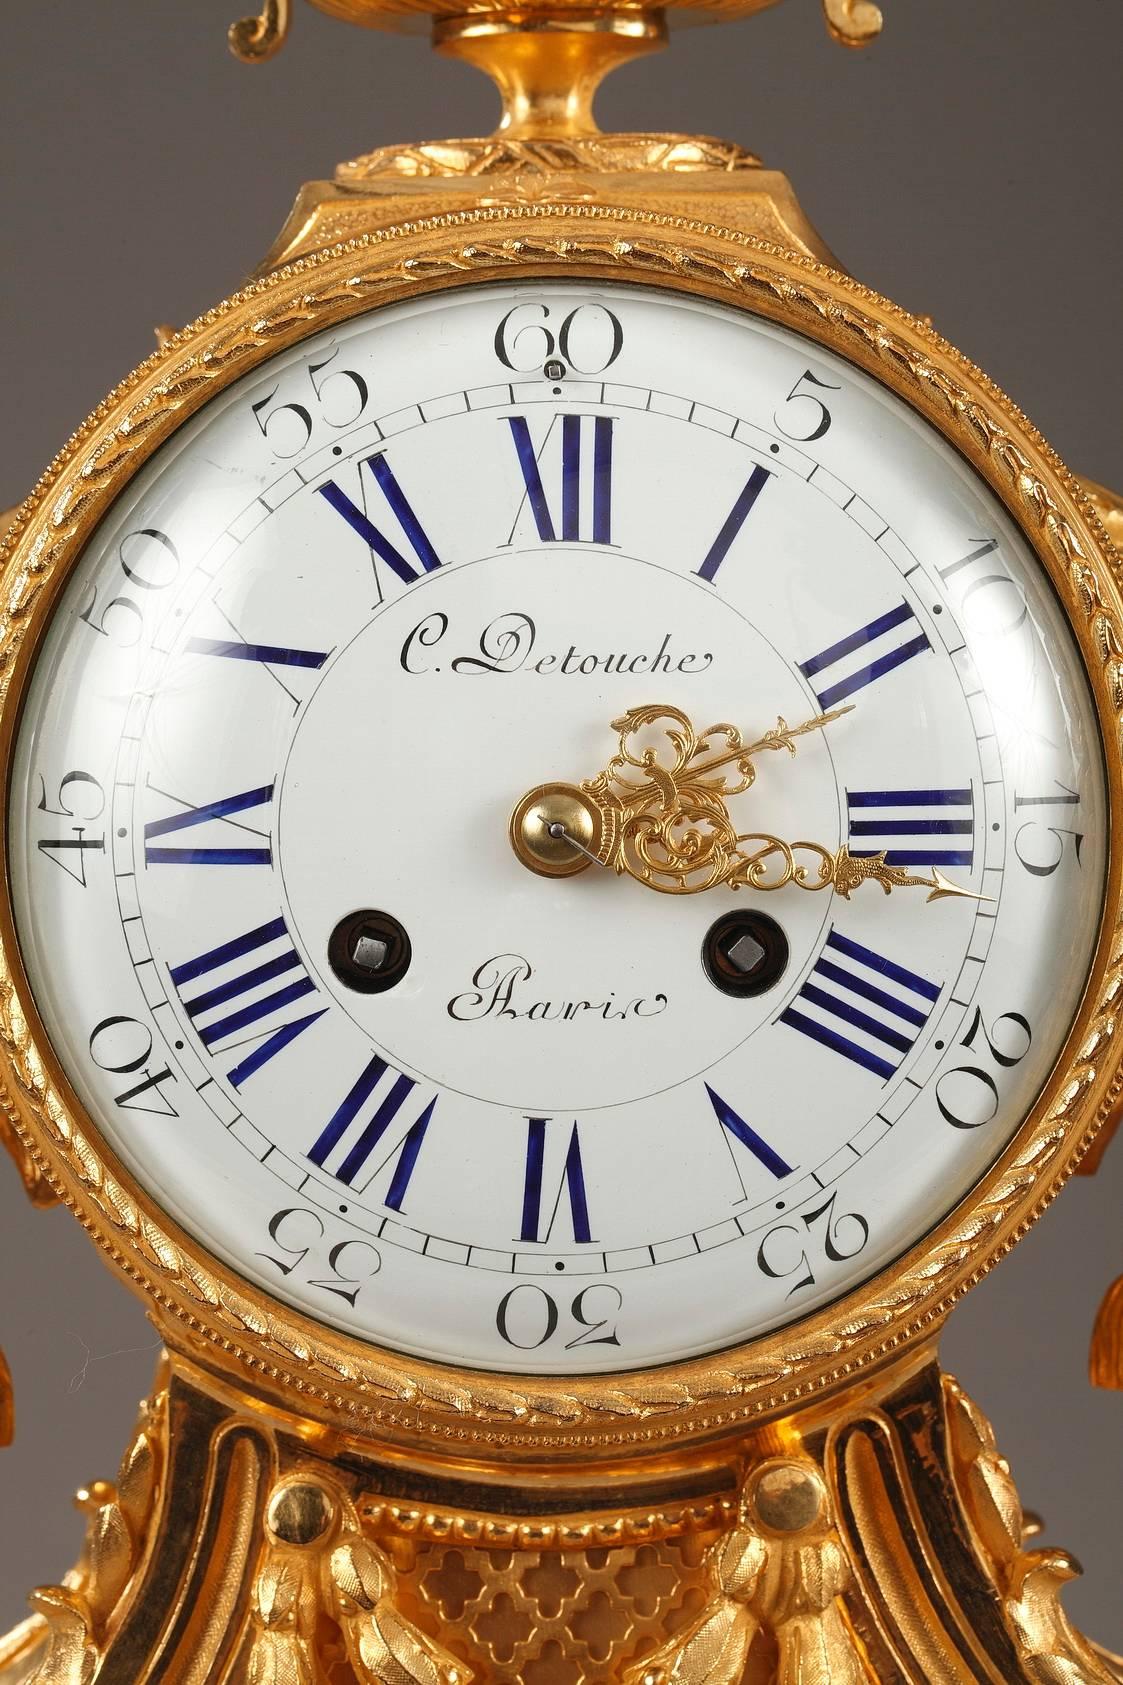 Napoleon III Mantel Clock in Louis XVI Style by C. Detouche, 19th Century  at 1stDibs | c. detouche clock, c detouche paris, louis xvi mantel clock